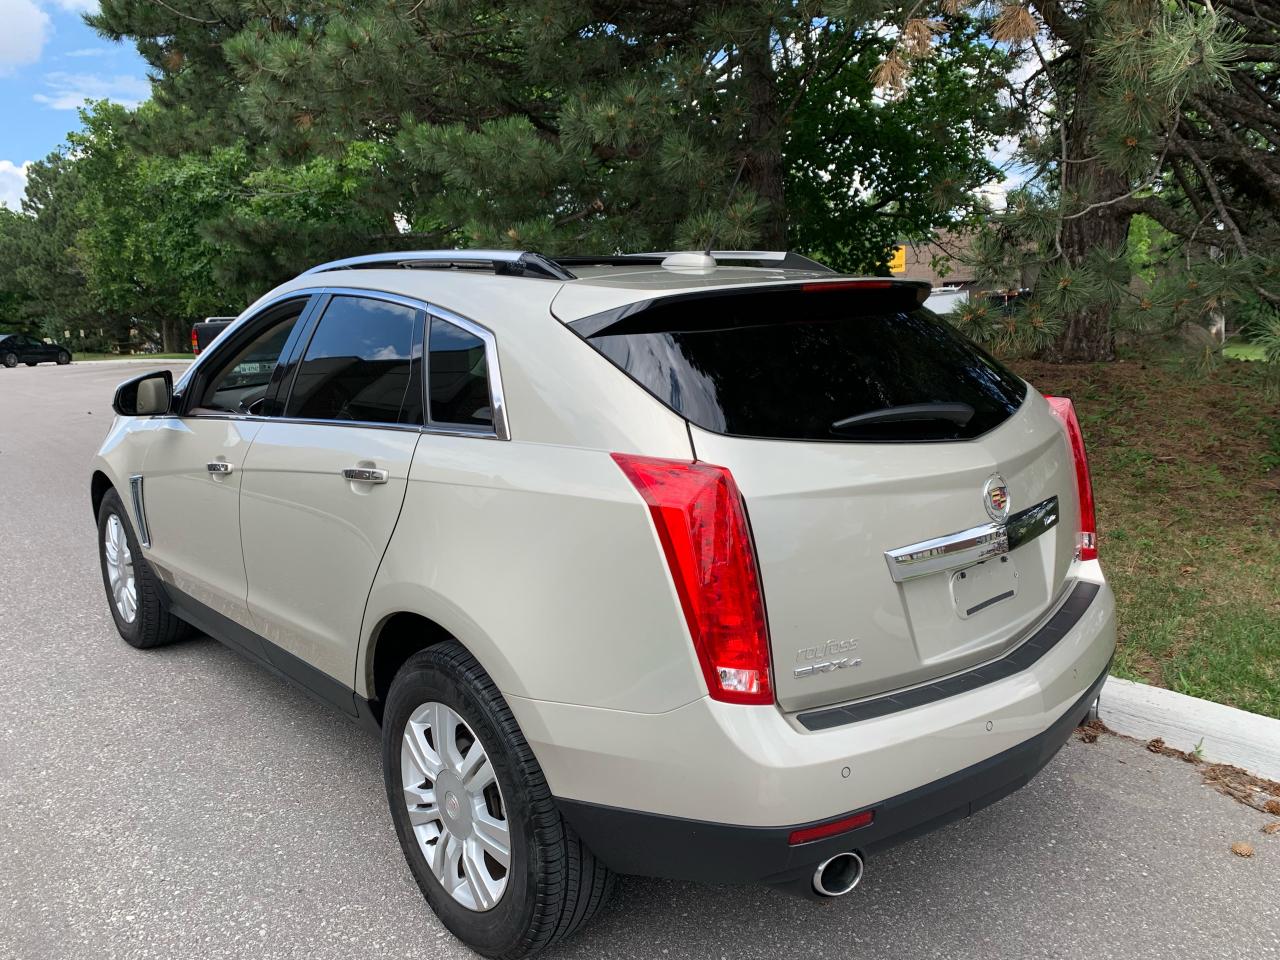 2015 Cadillac SRX LUXURY-ONLY 31,474 KMS!! 1 SENIOR OWNER! NO CLAIMS - Photo #3